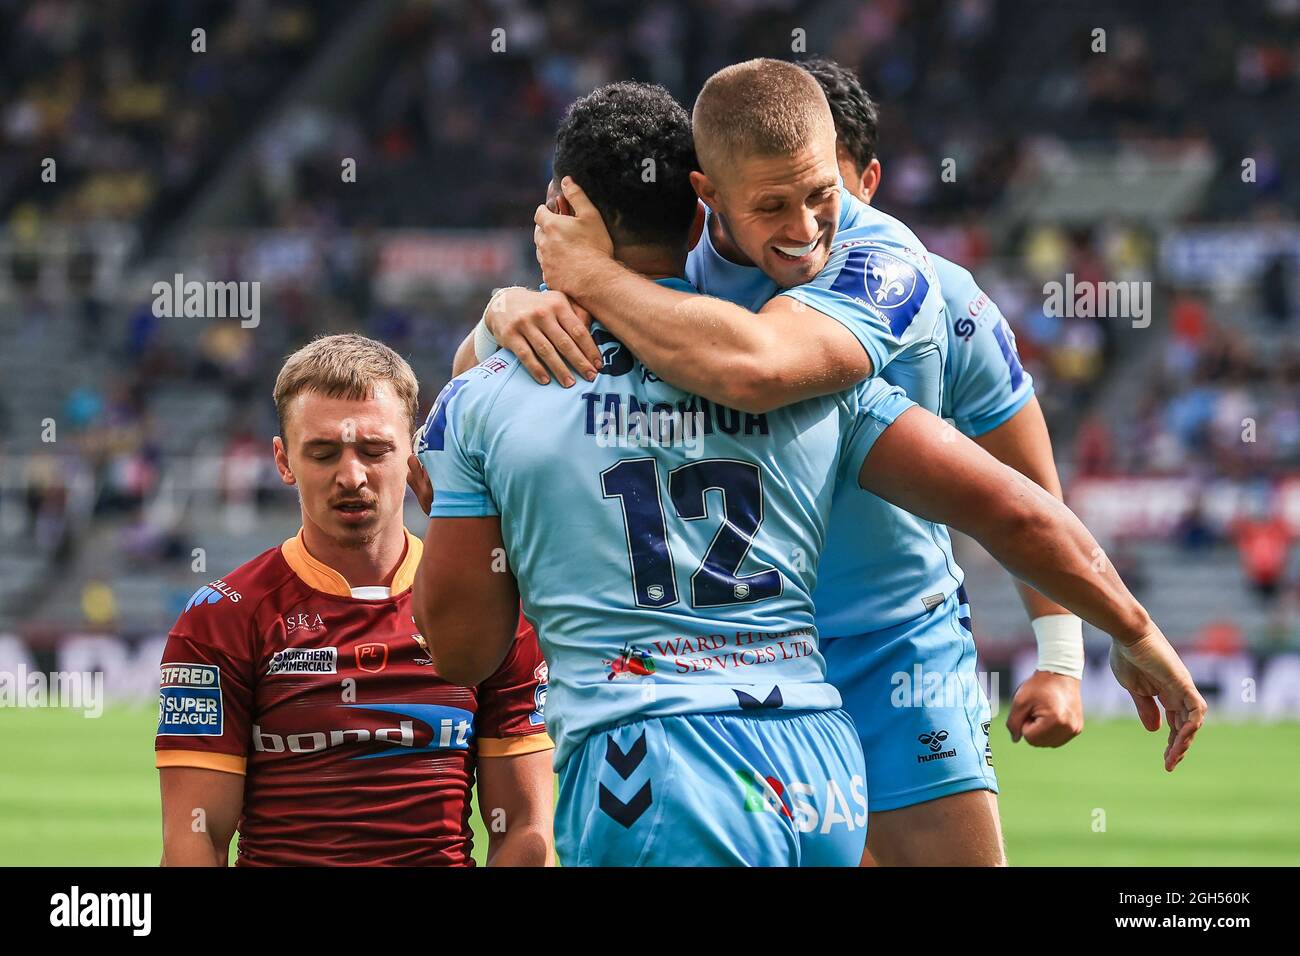 Kelepi Tanginoa (12) of Wakefield Trinity celebrates his try in, on 9/5/2021. (Photo by Mark Cosgrove/News Images/Sipa USA) Credit: Sipa USA/Alamy Live News Stock Photo